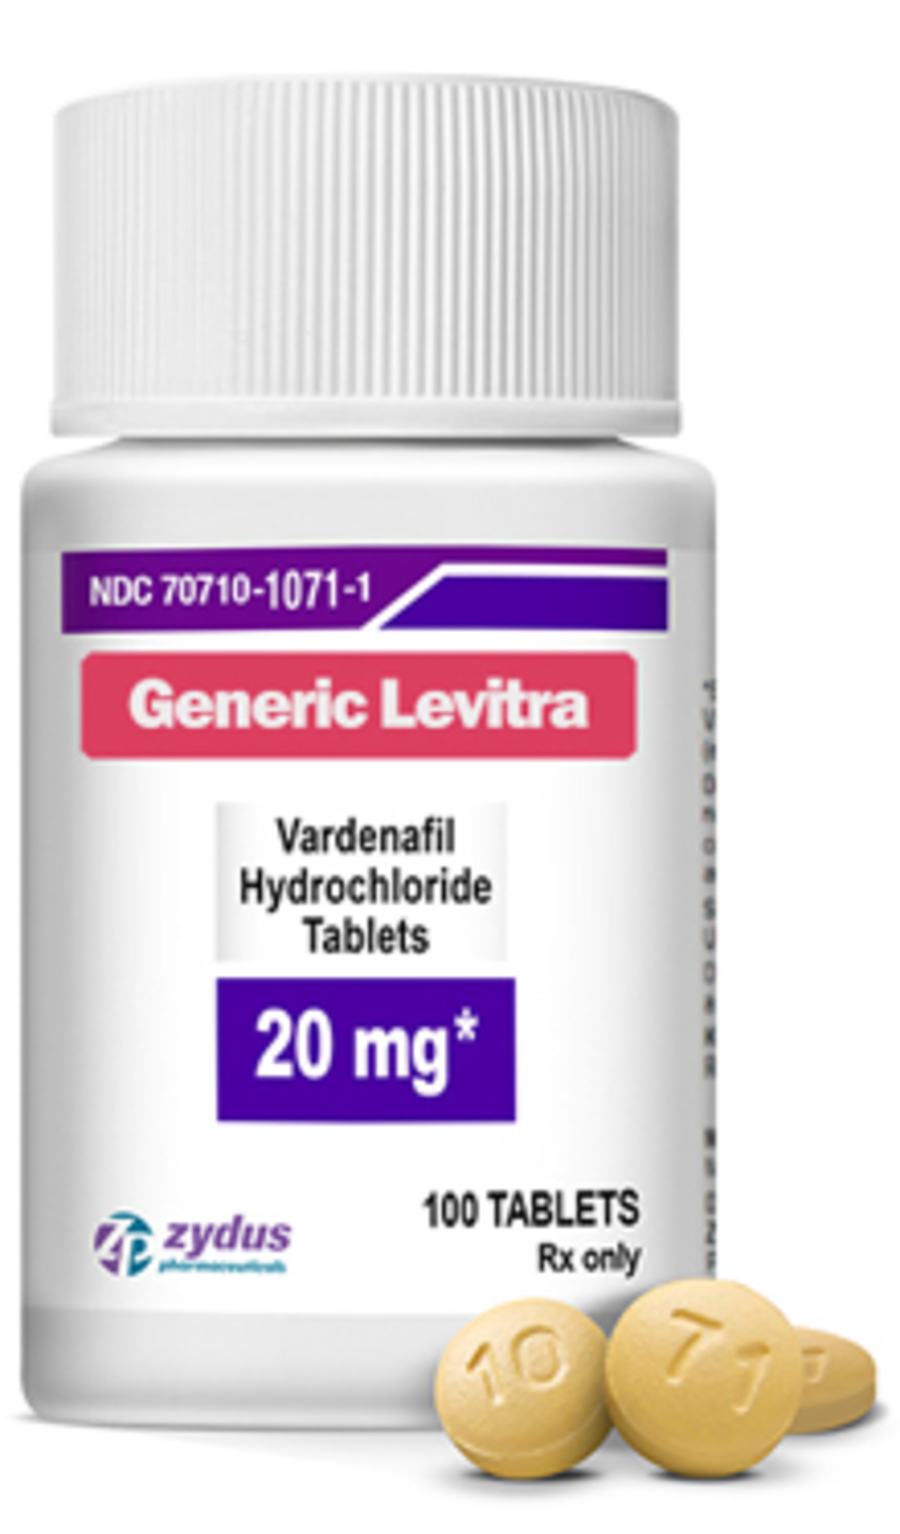 Levitra and Vardenafil Prices at Walmart | Online ...